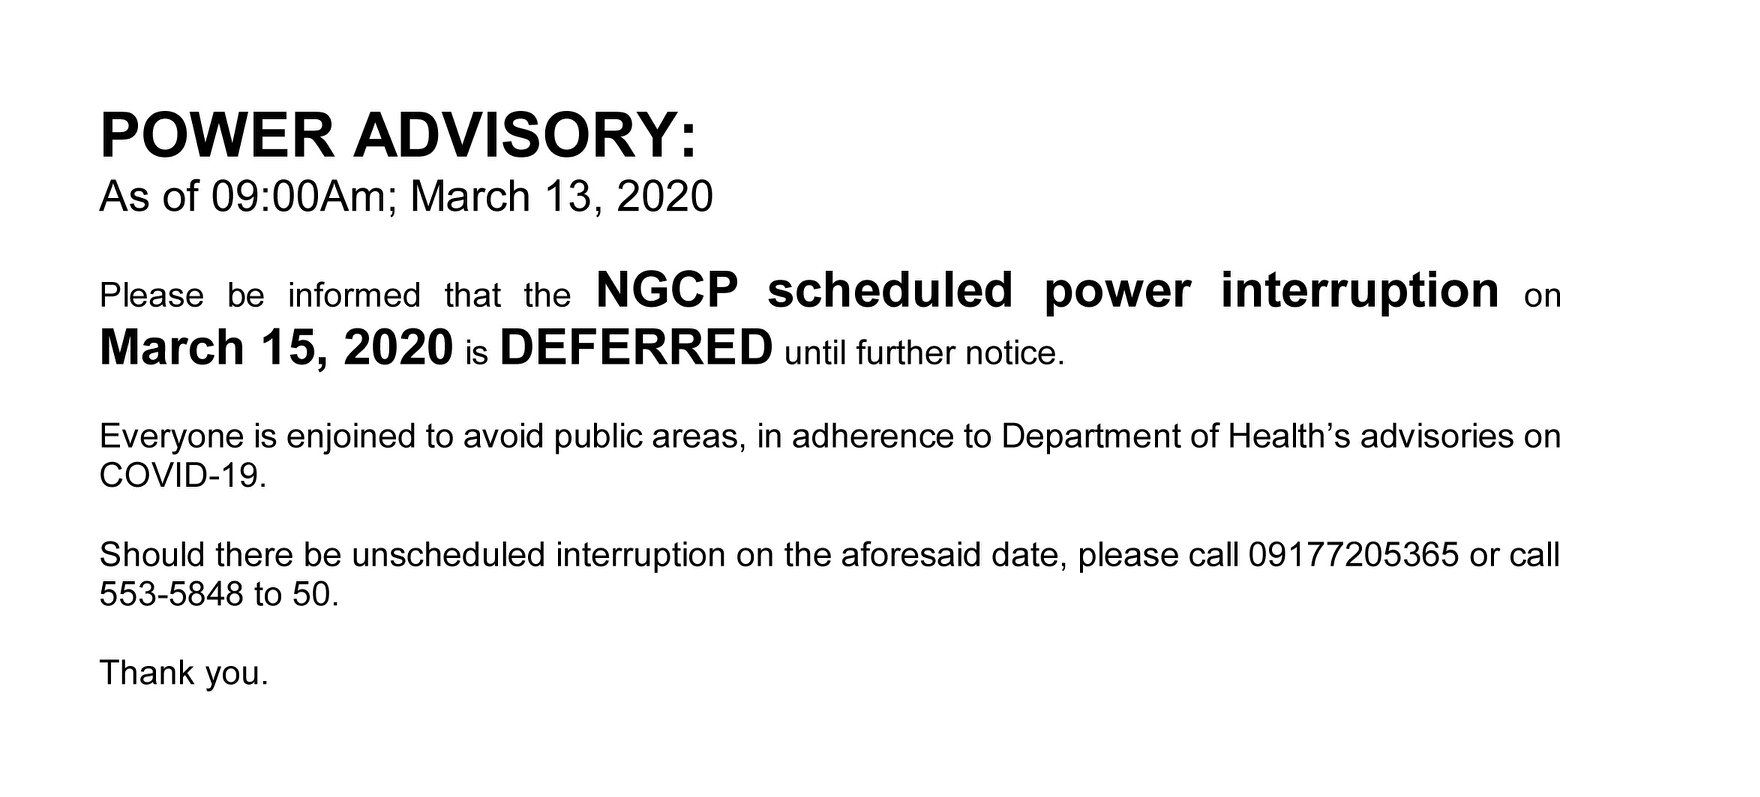 POWER ADVISORY: As of 09:00Am; March 13, 2020